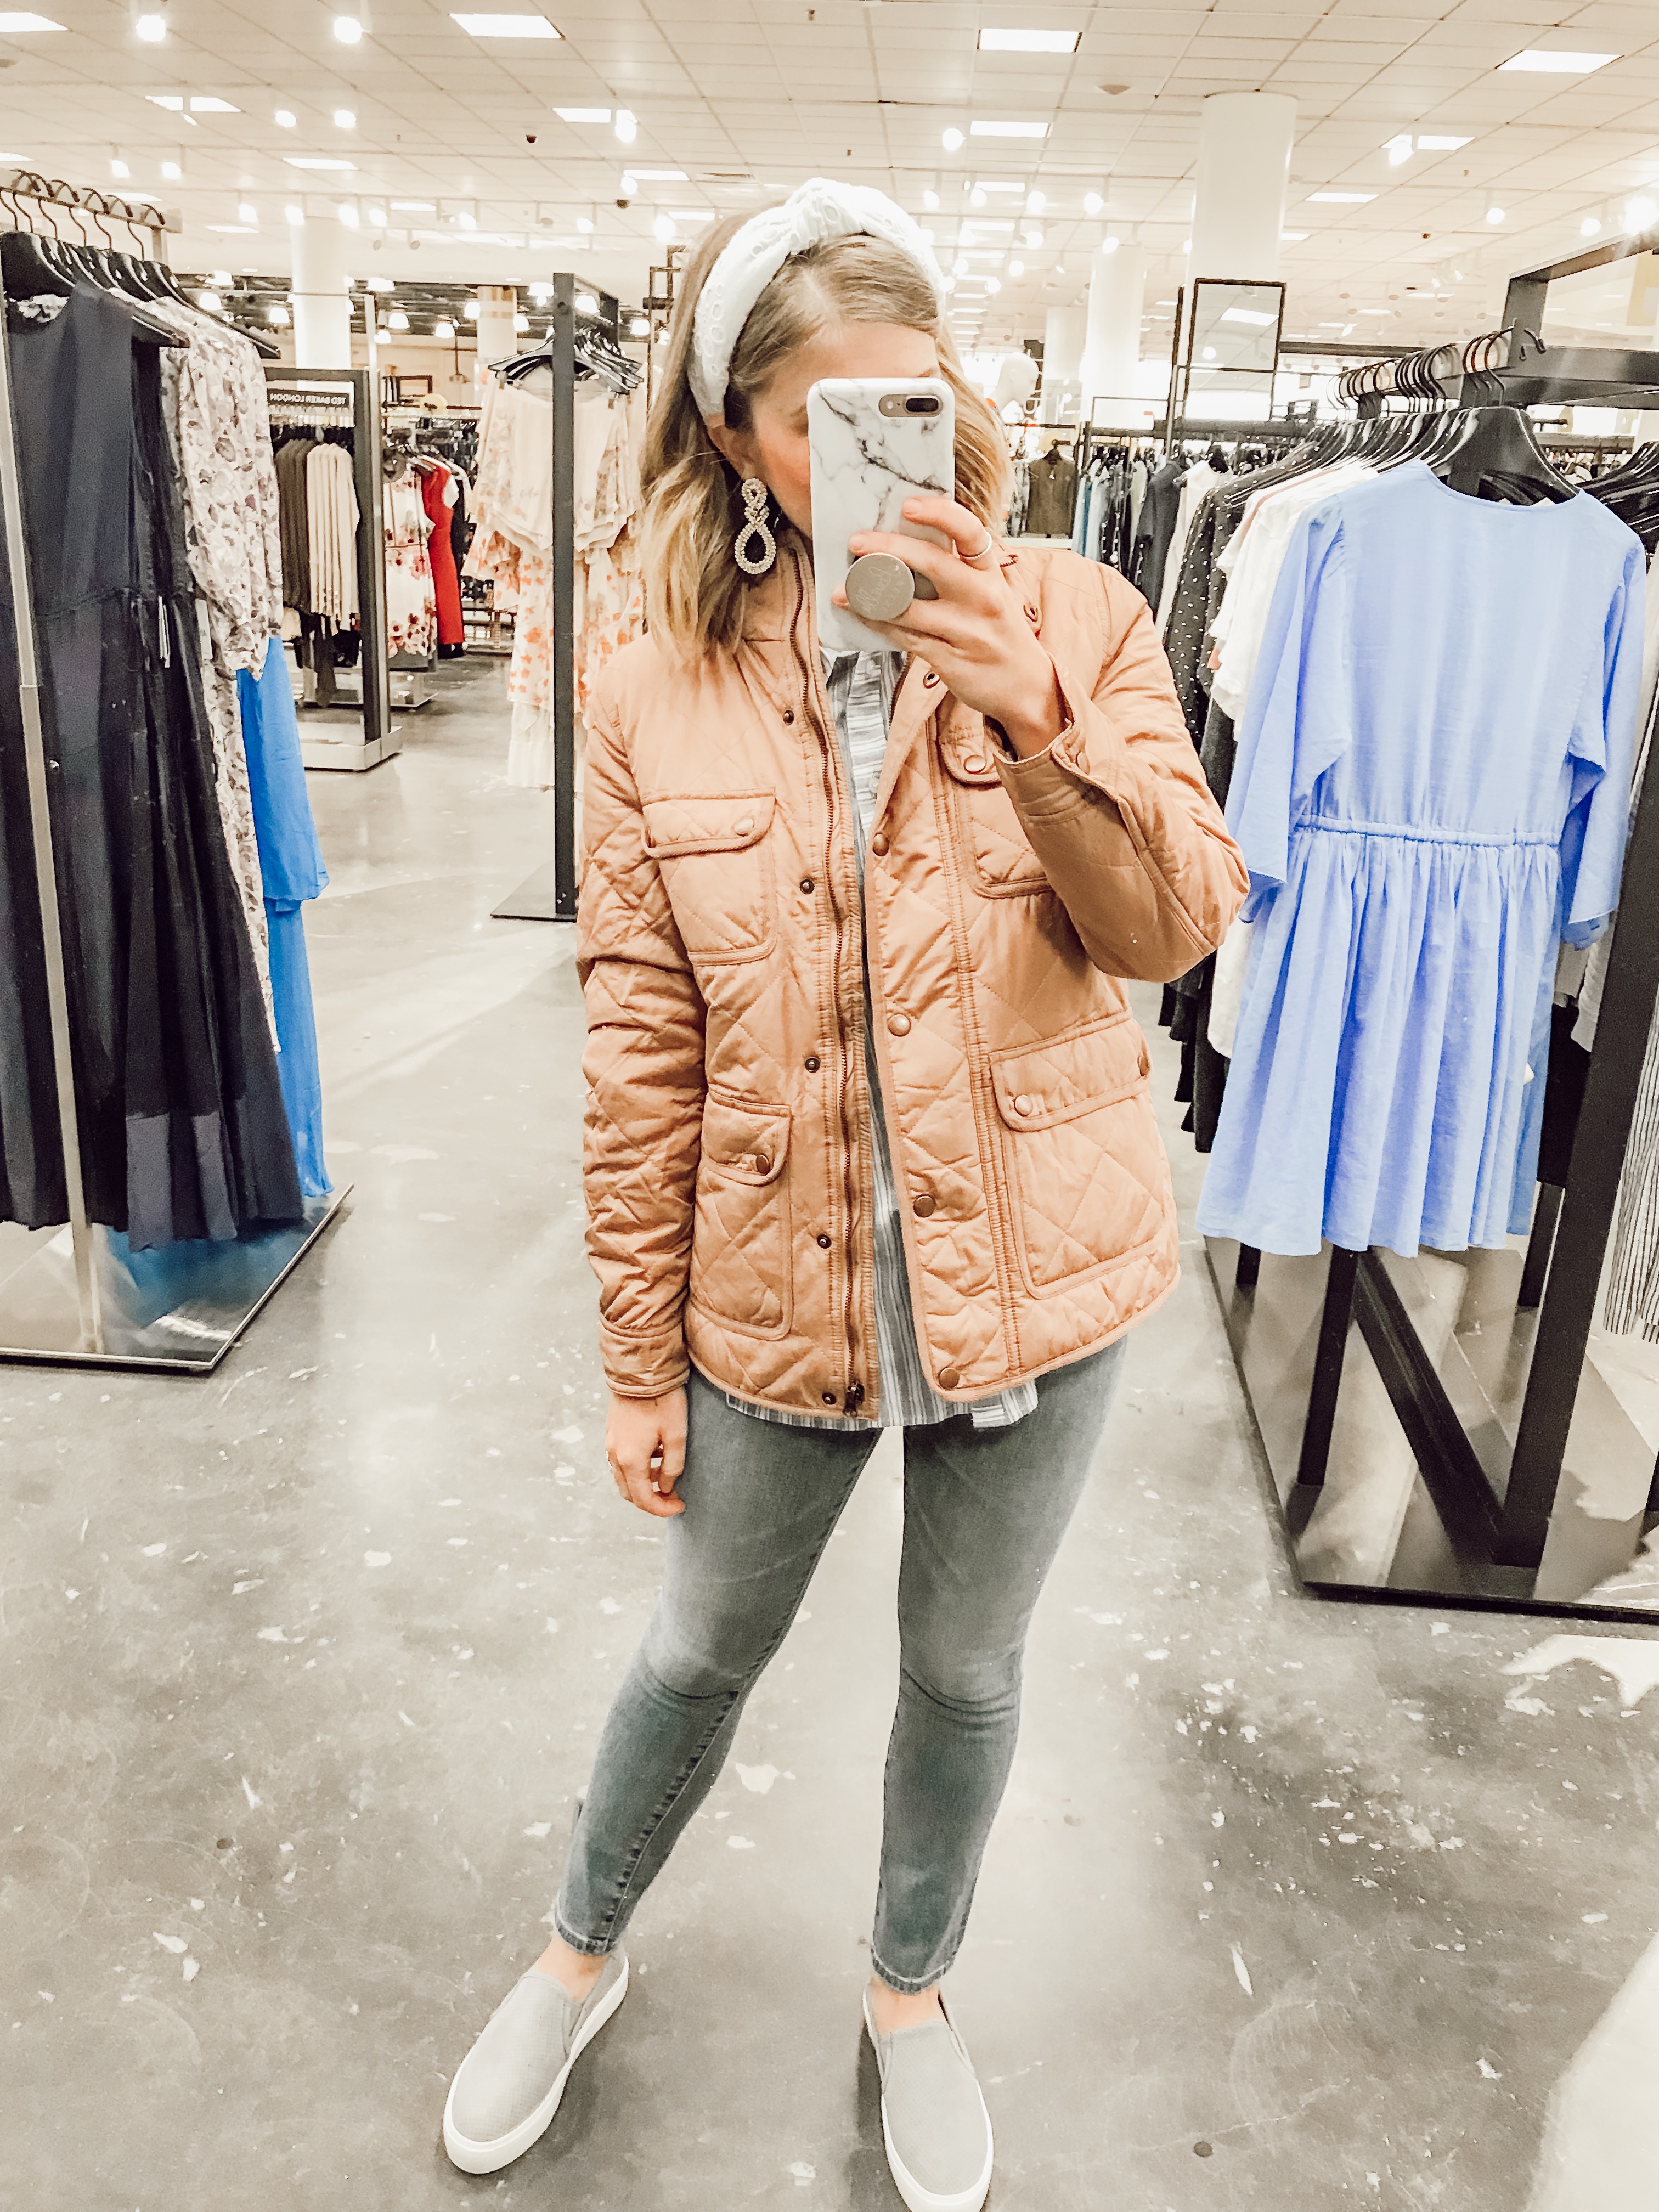 Thread & Supply Fleece Lined Quilted Utility Jacket | | 2019 Nordstrom Anniversary Fitting Room Session featured on Louella Reese Life & Style Blog